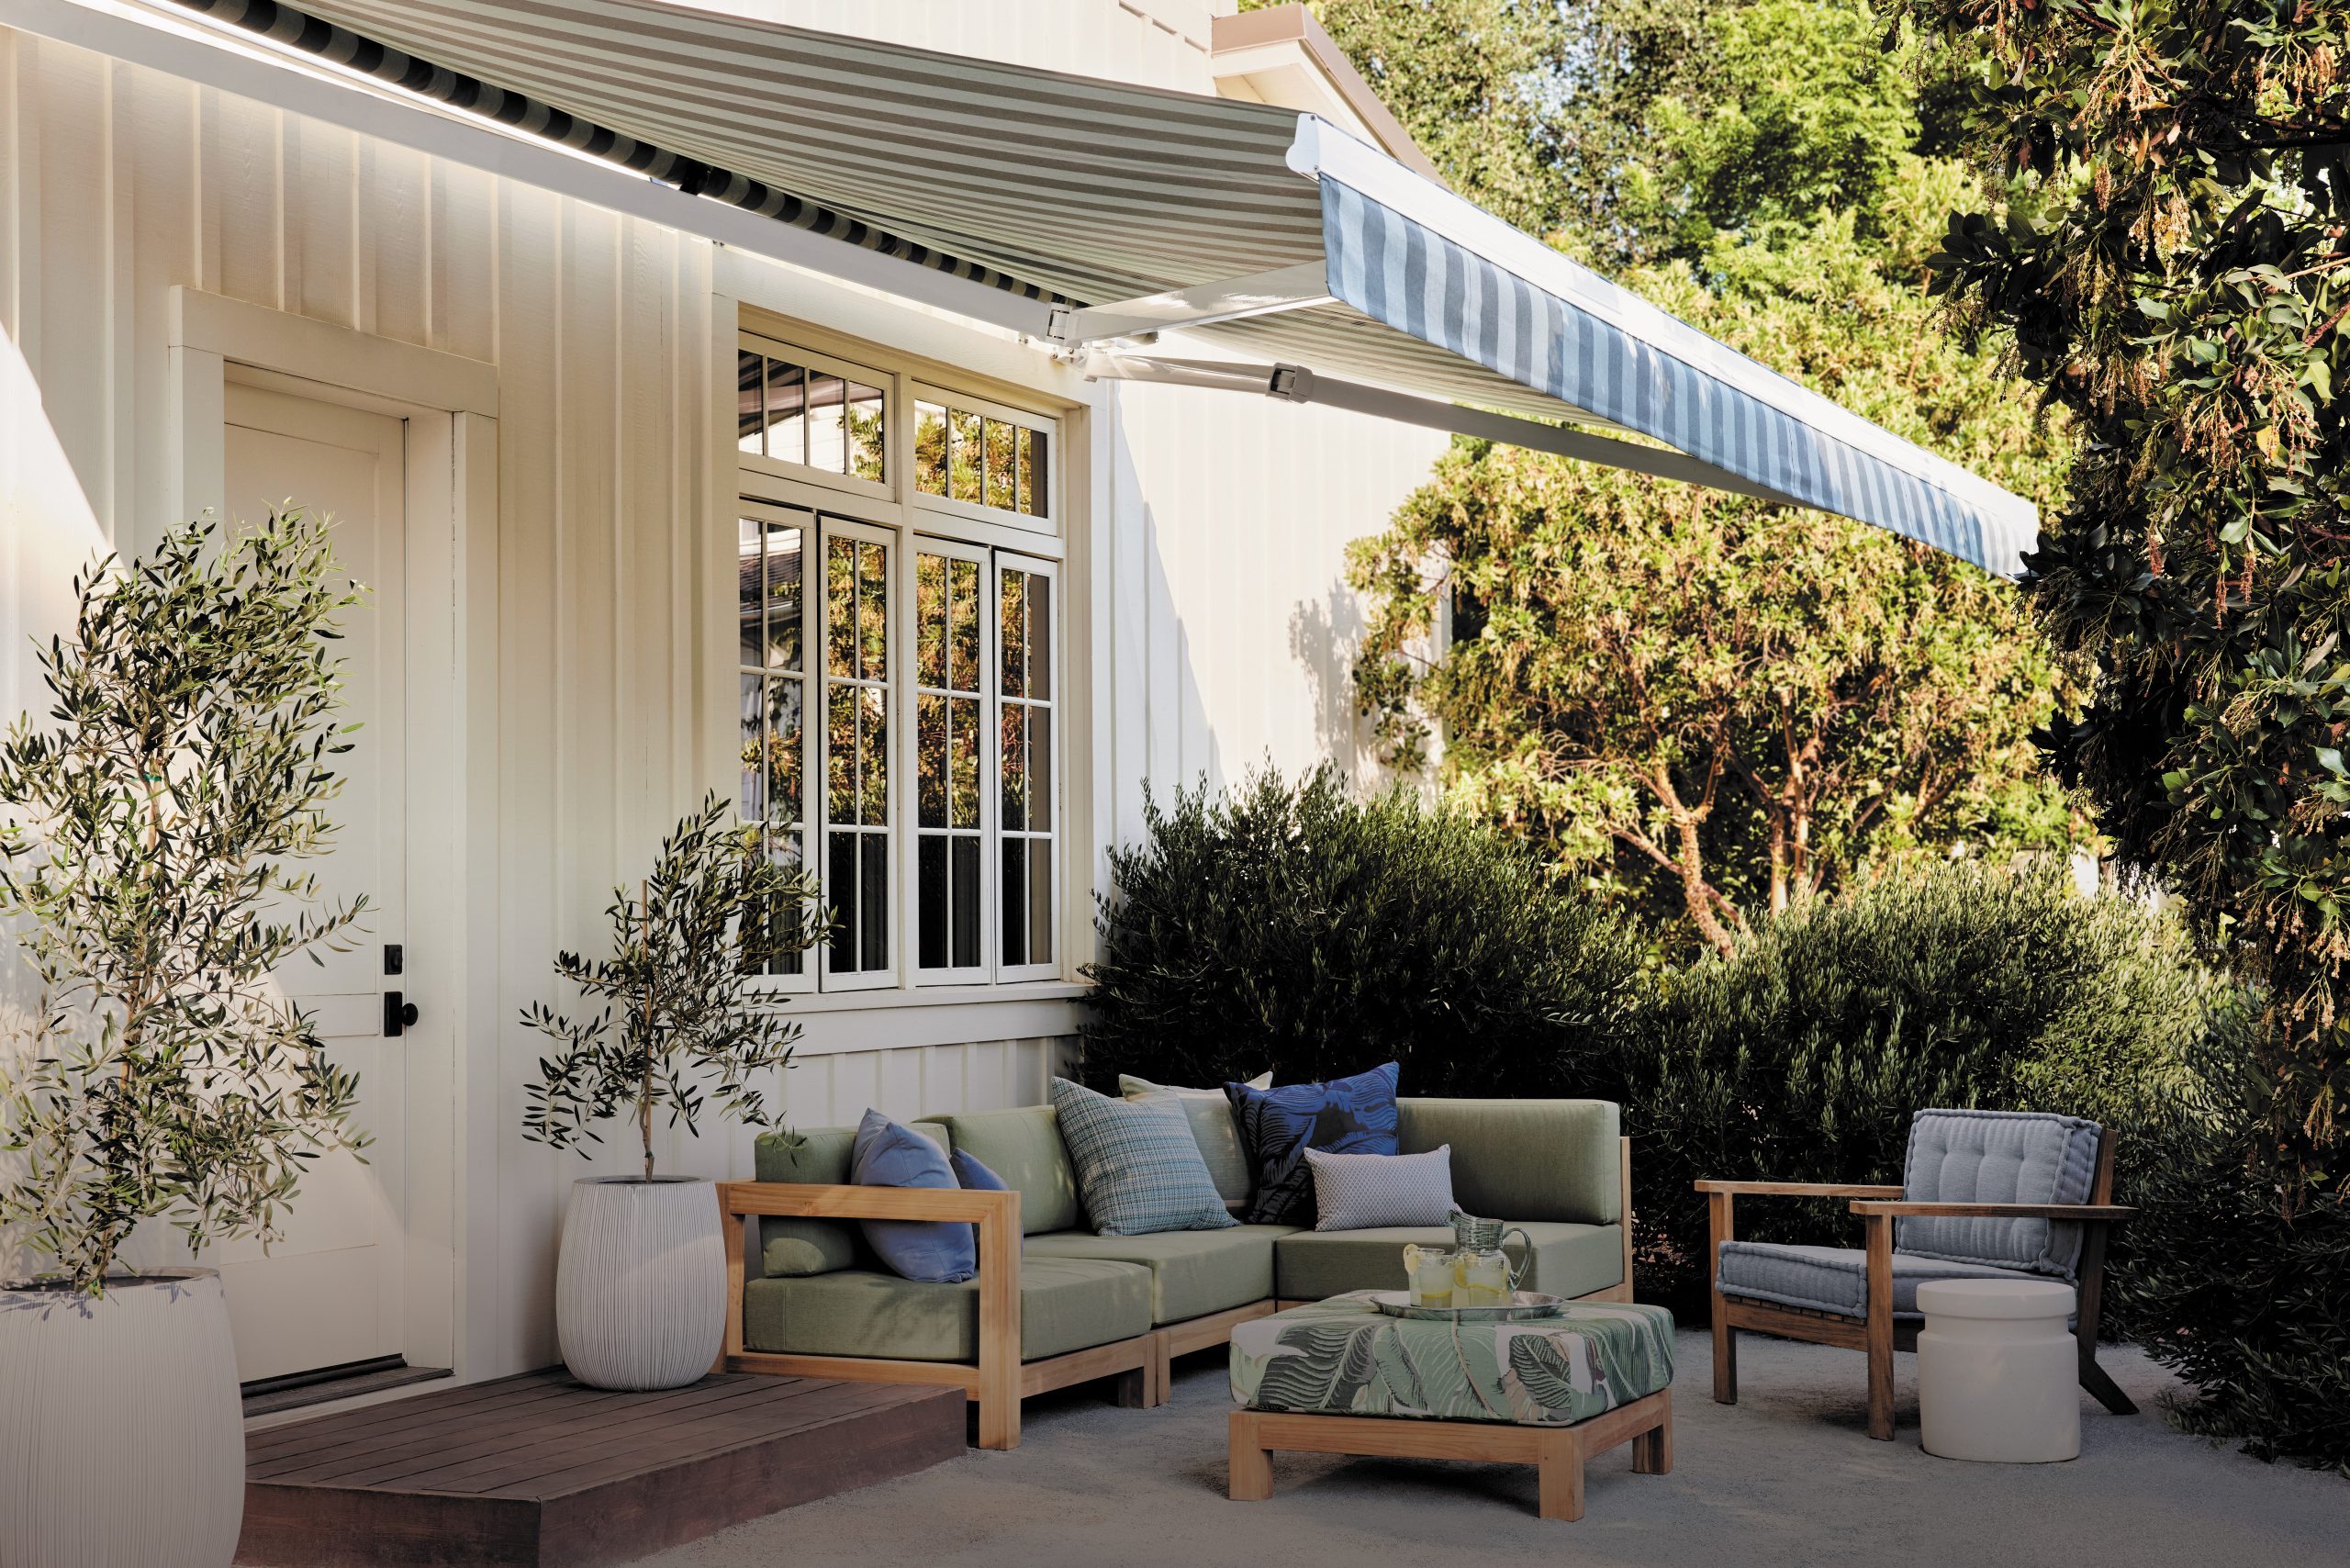 5 Ways to Turn Your Patio into a Living Room